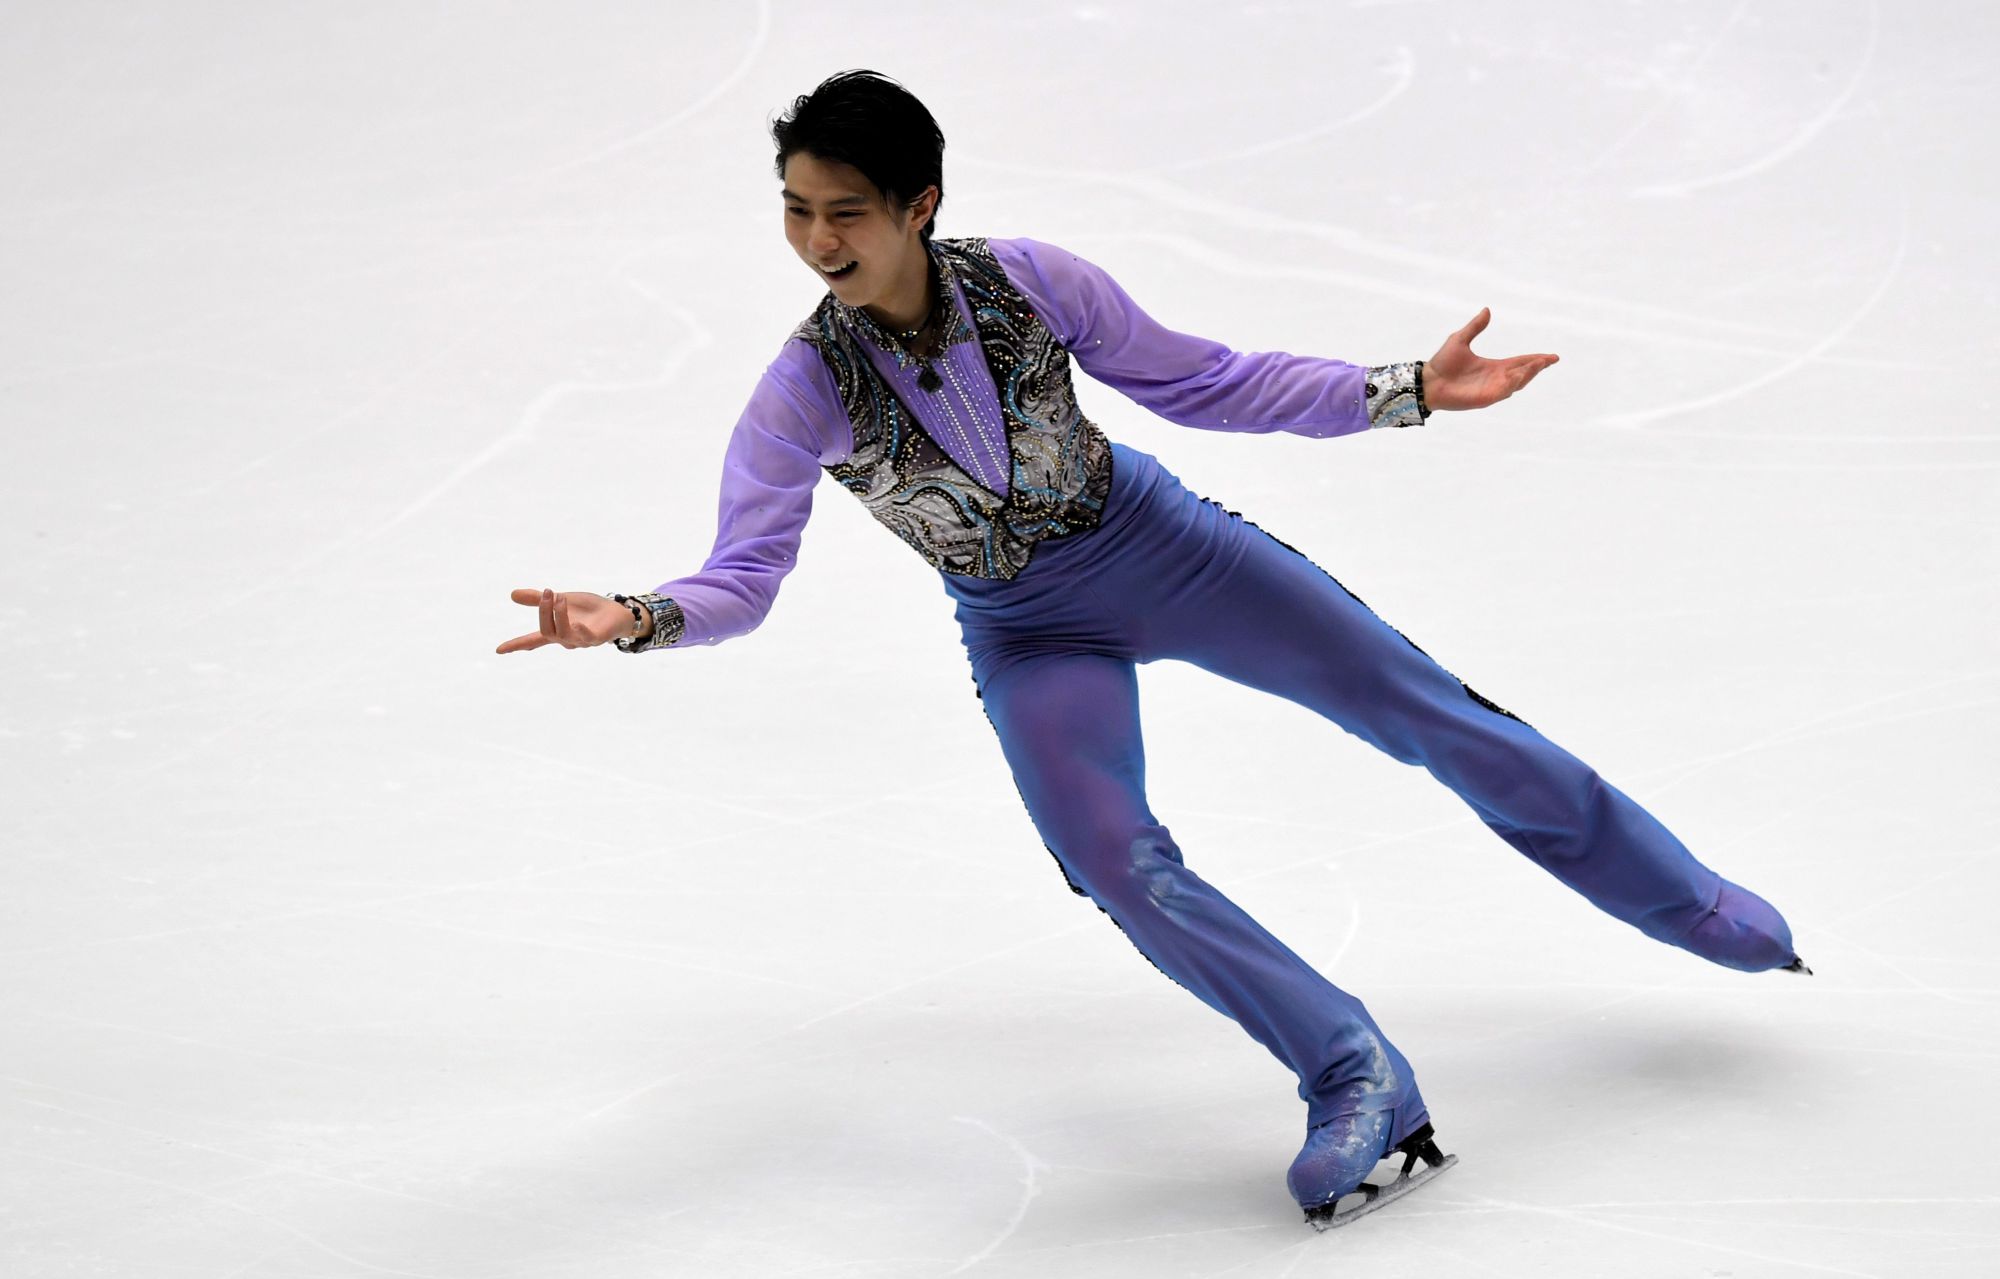 Yuzuru Hanyu performs his short program at the NHK Trophy on Friday in Sapporo. Hanyu received a top score of 103.89 points, putting him in firm control in the men's singles competition at Makomanai Arena. | AFP-JIJI